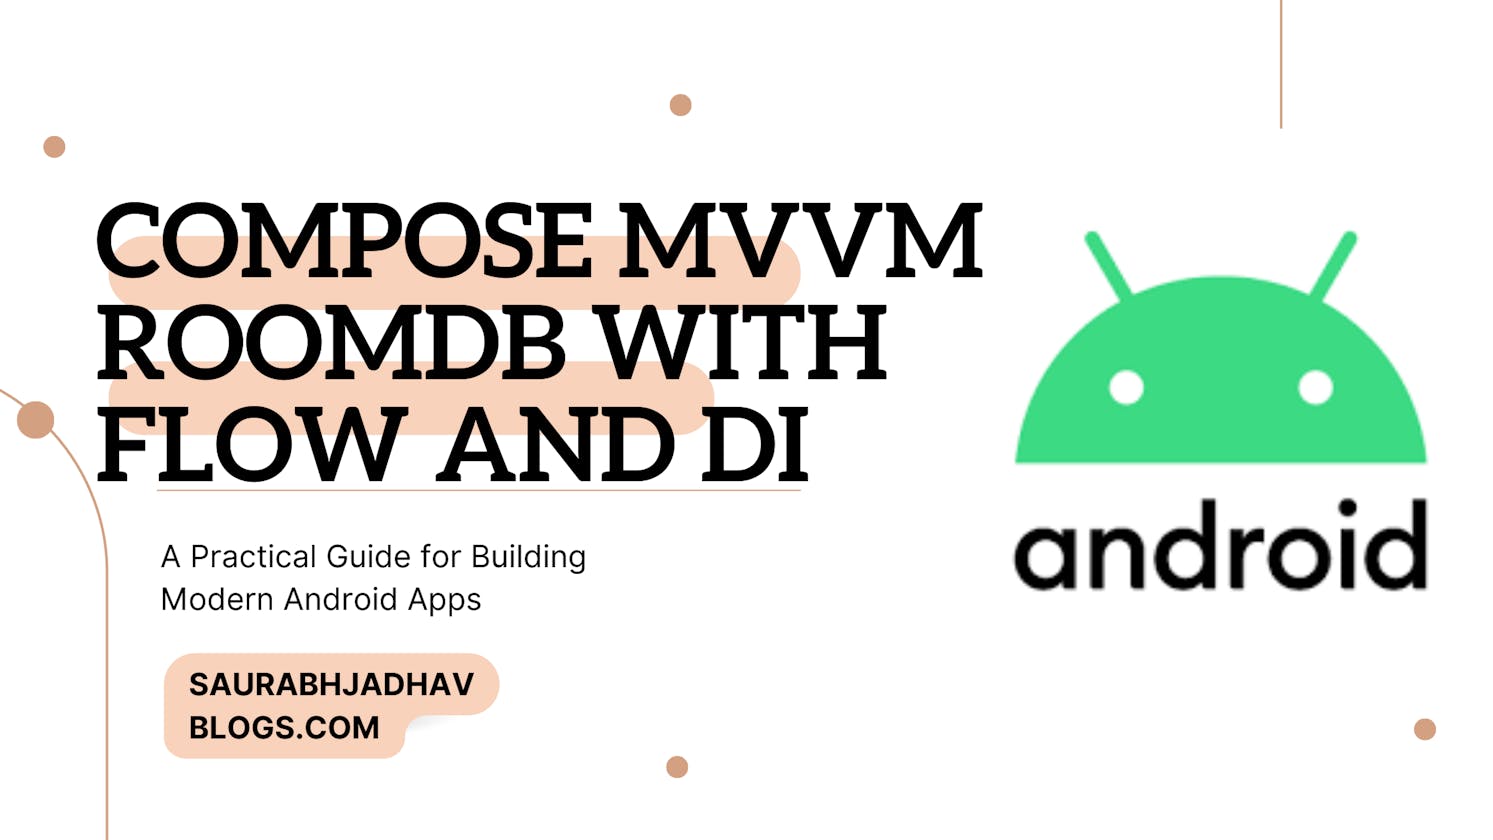 Compose MVVM RoomDB with Flow and DI